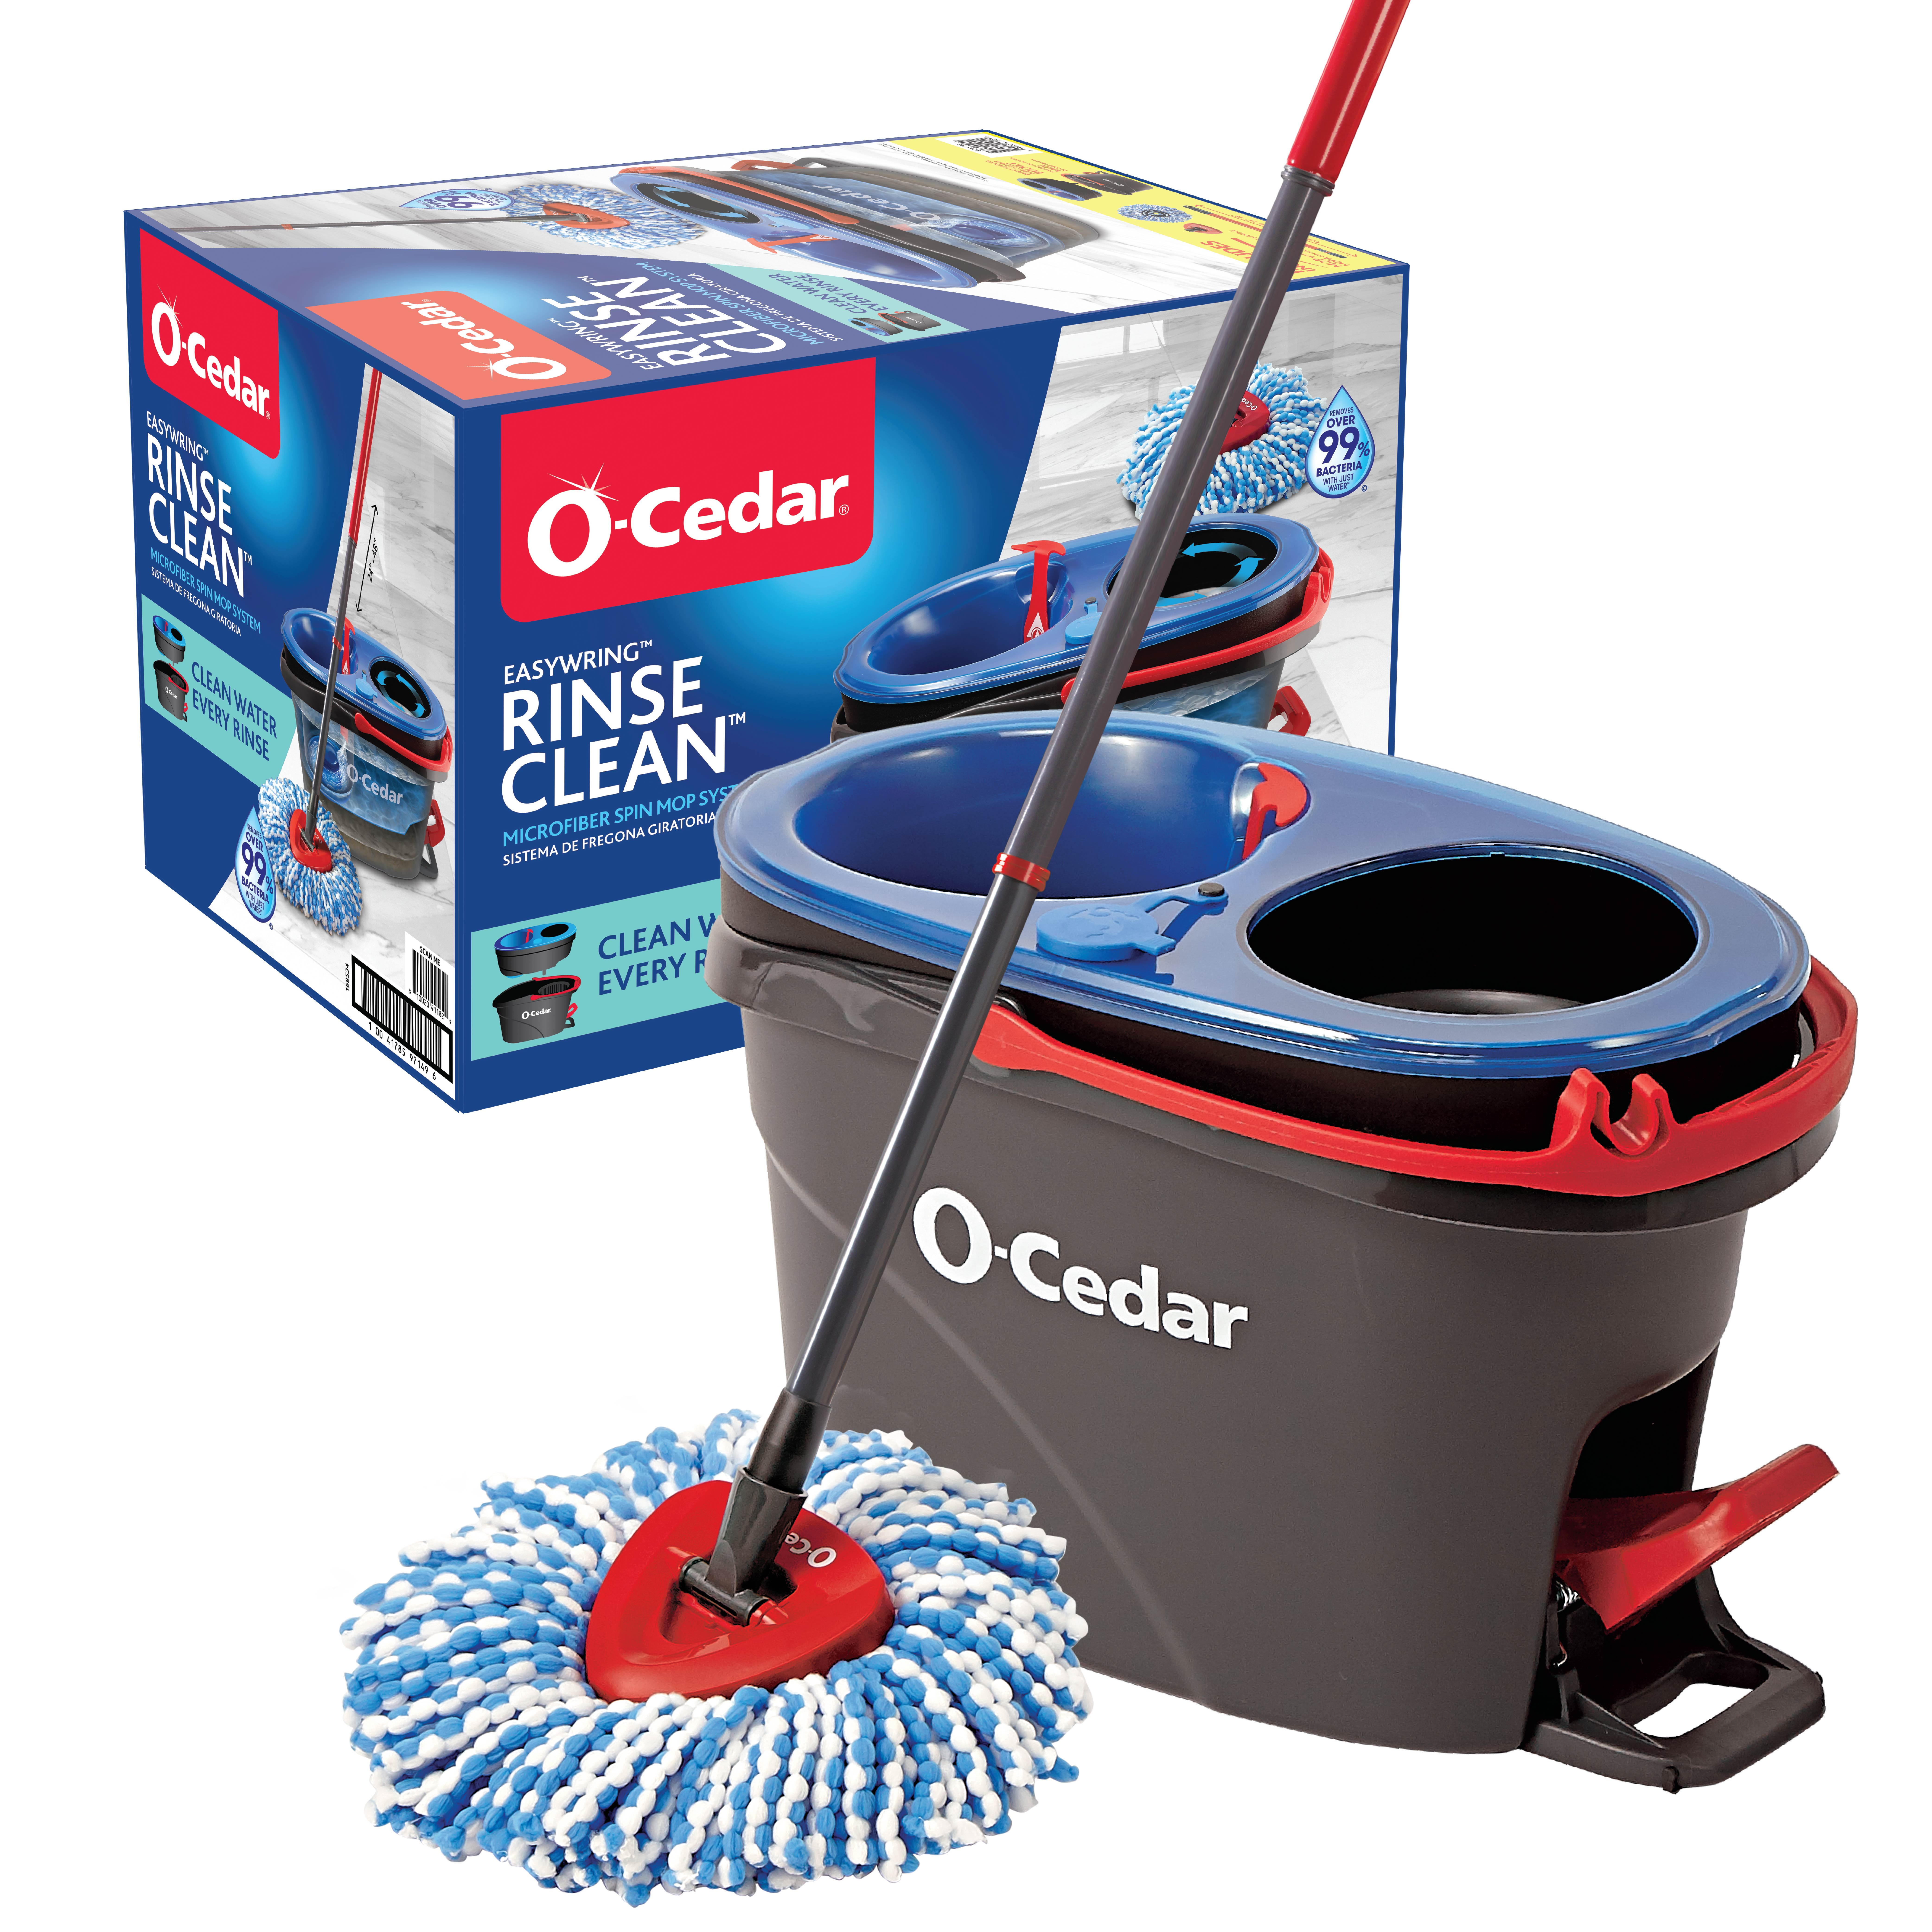 O-Cedar EasyWring RinseClean Spin Mop and Bucket System, Hands-Free System - image 1 of 25